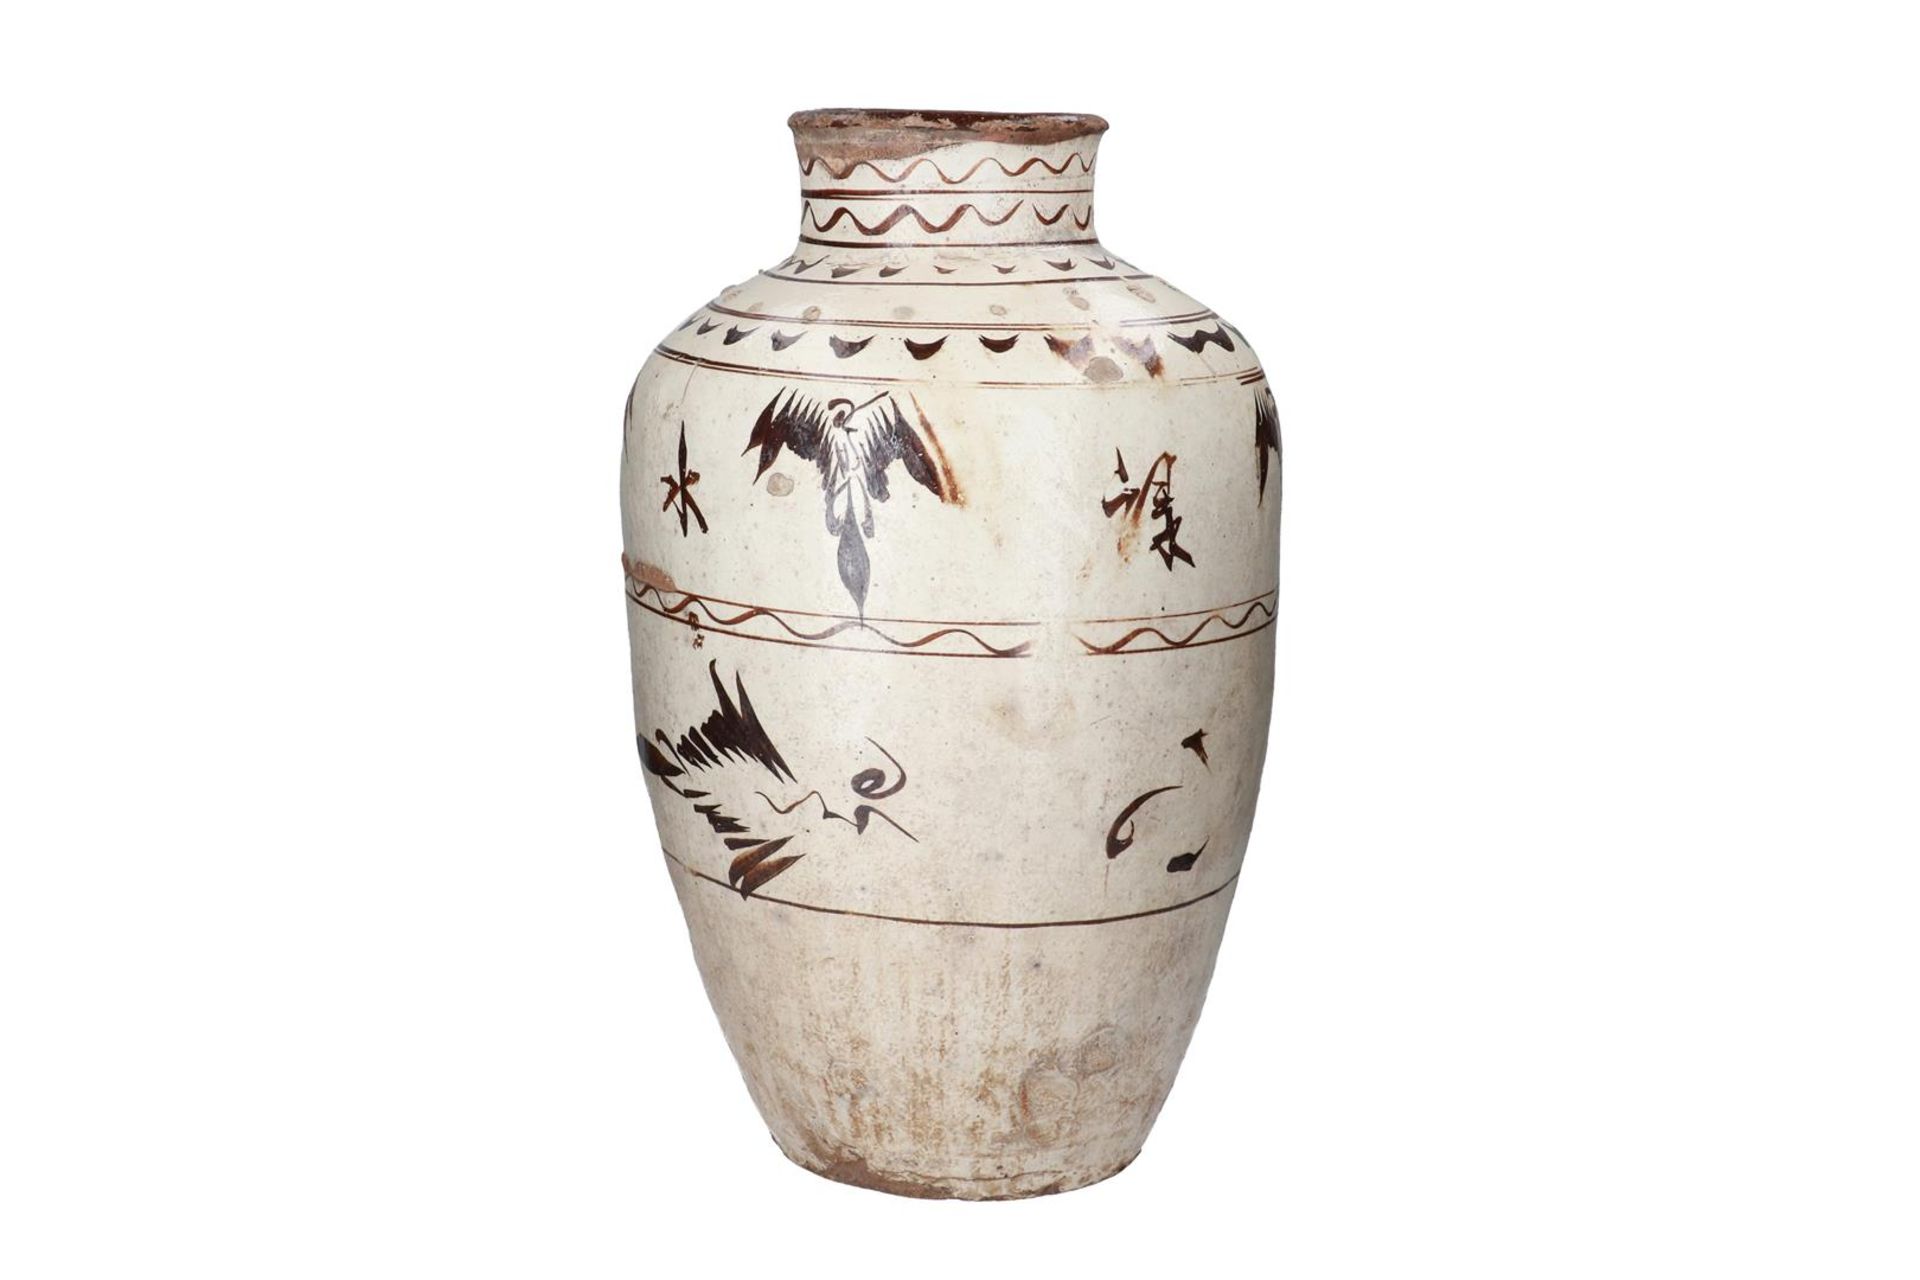 A polychrome Cizhou ware vase, decorated with patterns. Unmarked. China, late Ming. H. 54 cm. - Image 2 of 5